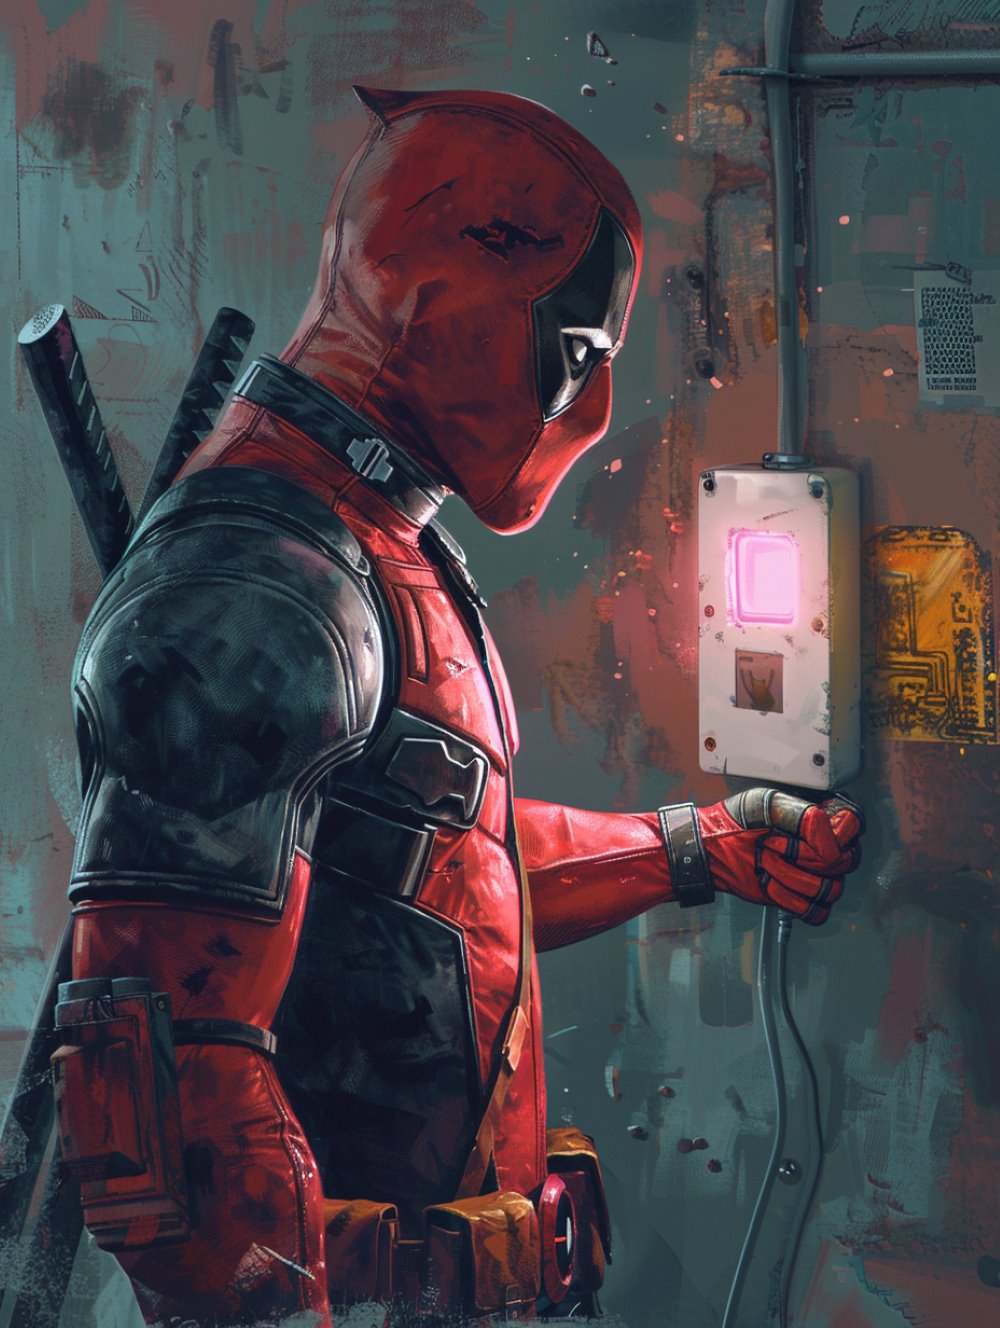 Deadpool is turning off a switch